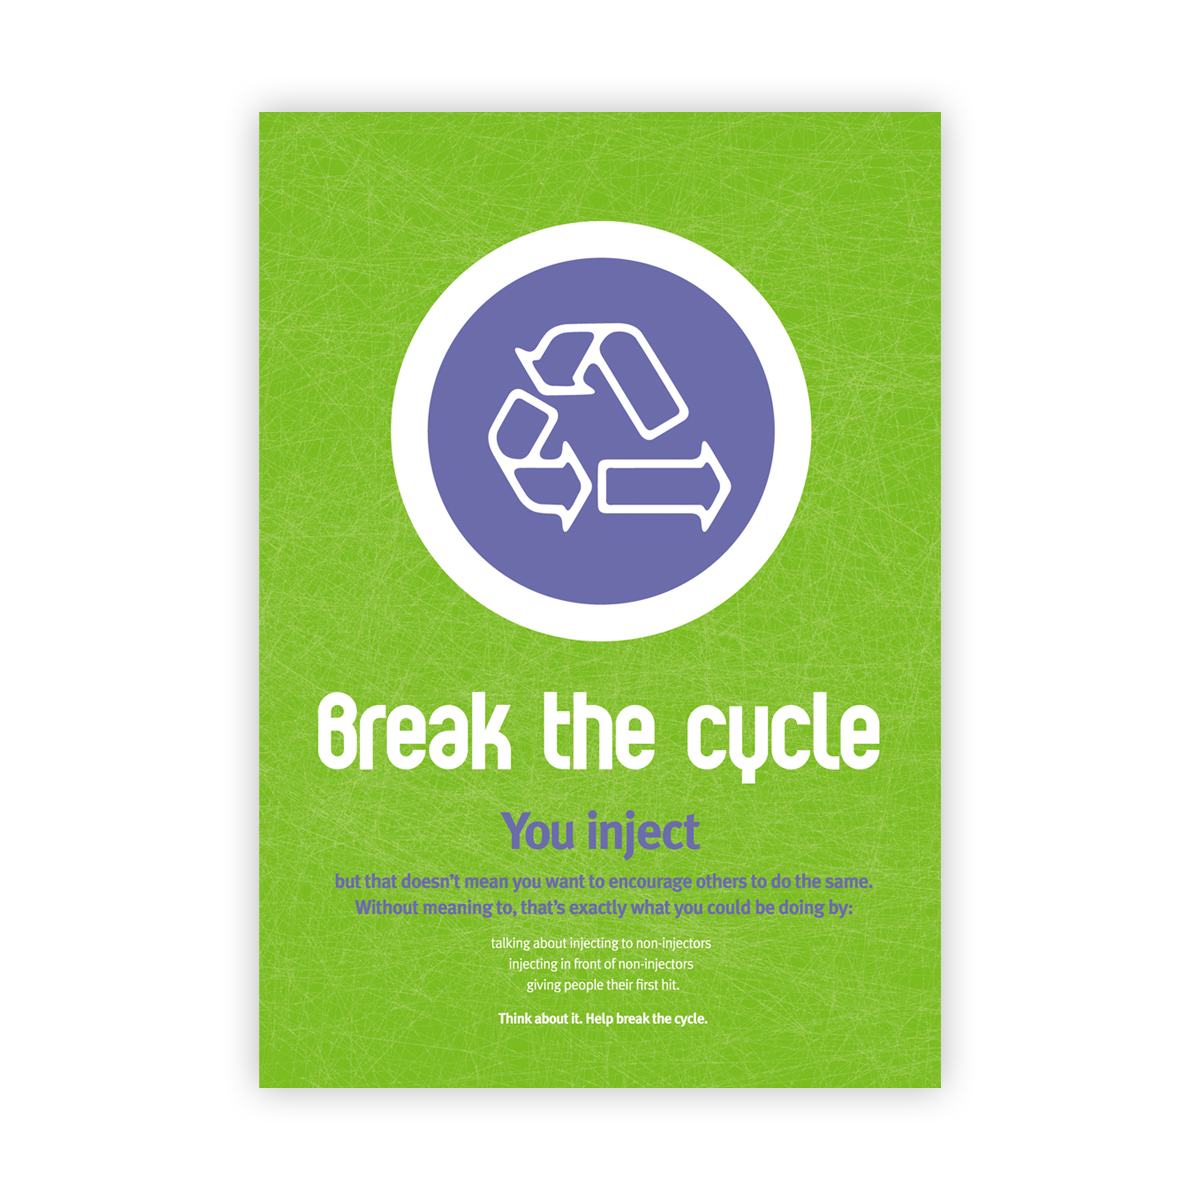 Break the cycle campaign: poster (large)